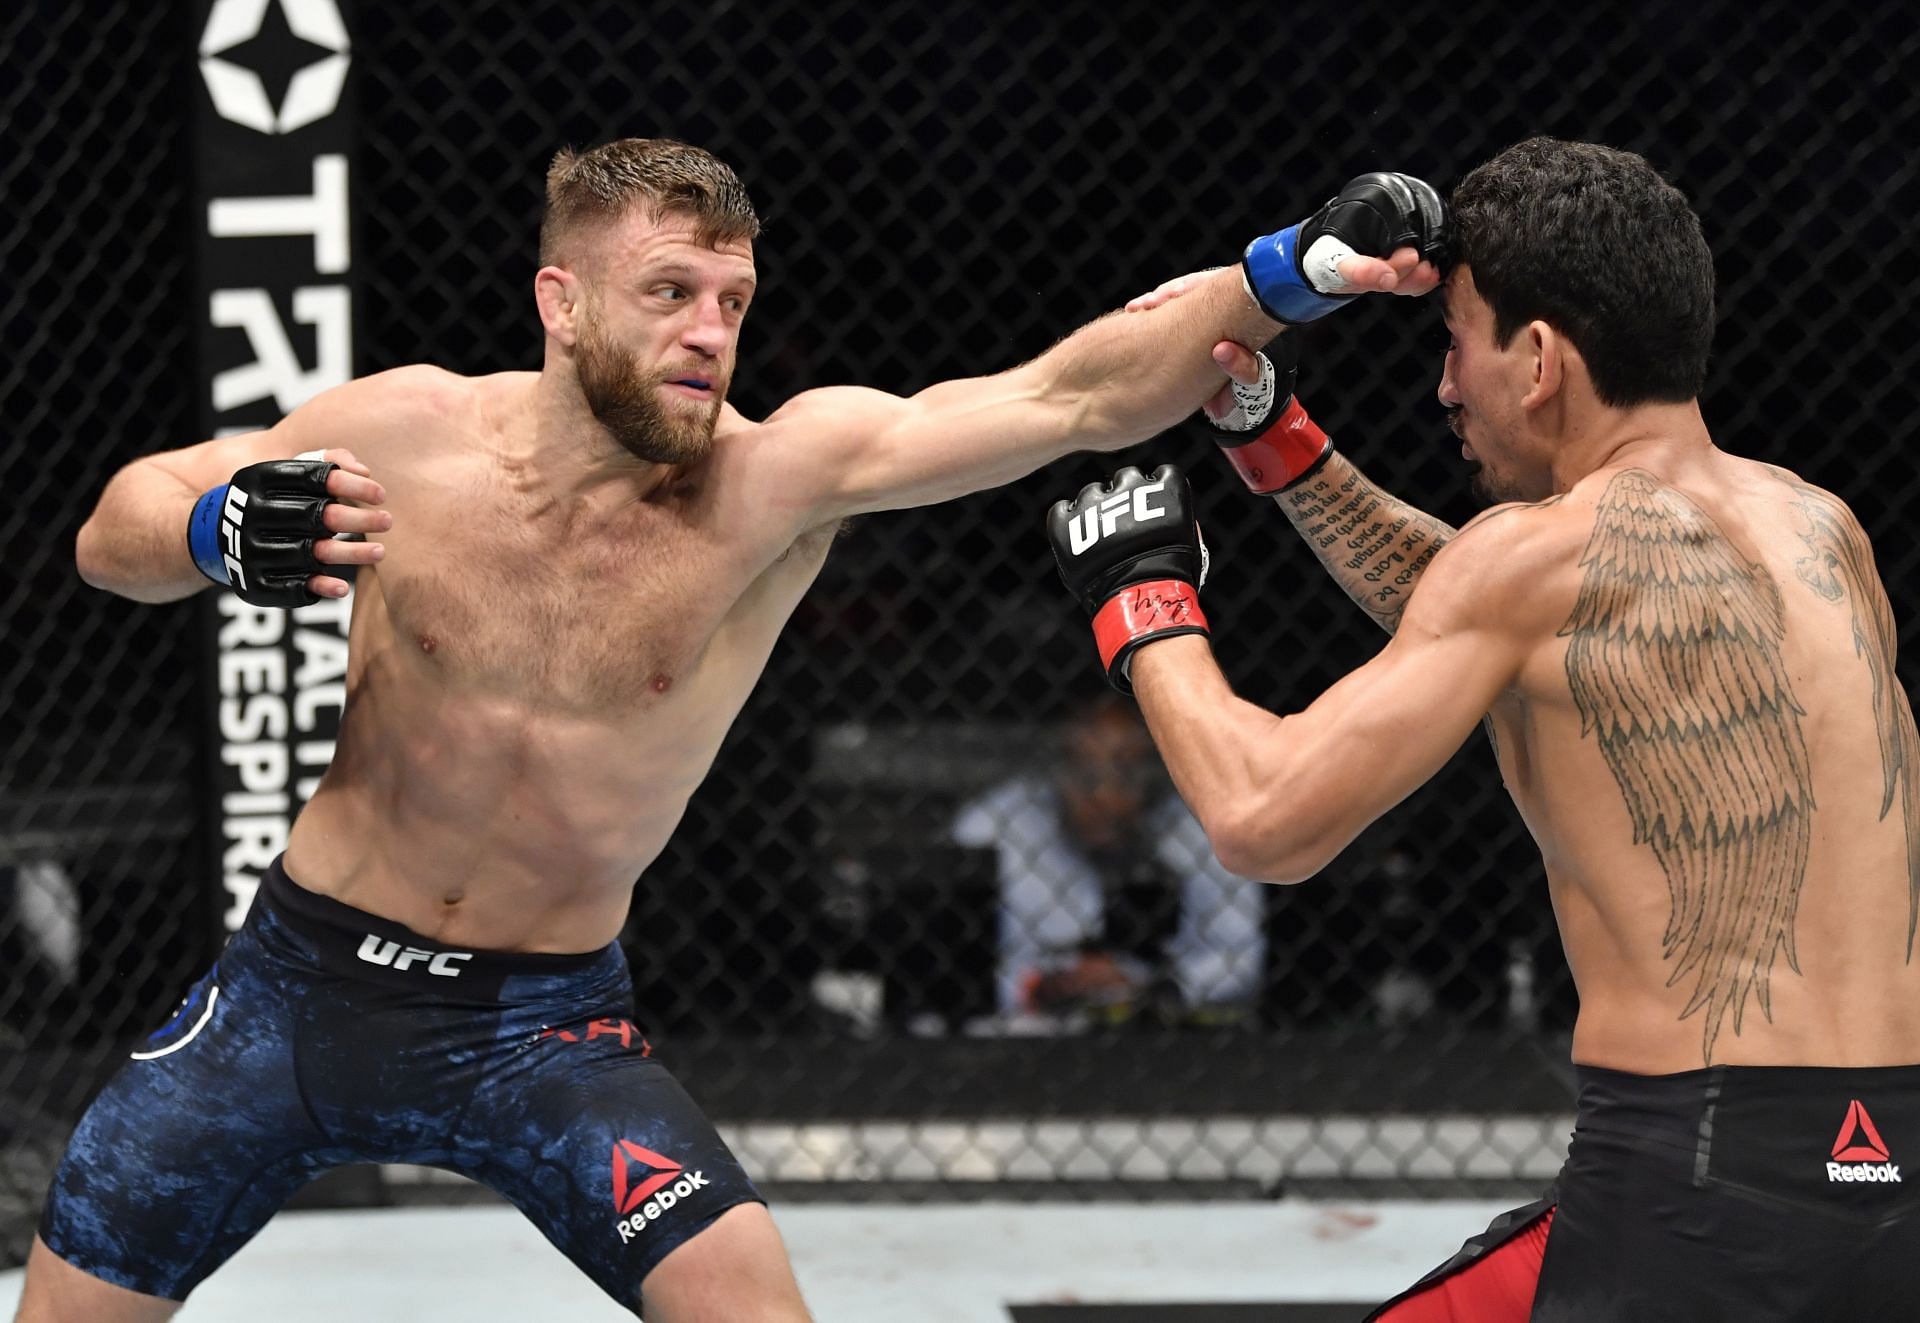 Calvin Kattar is one of the toughest featherweights in the division, meaning a win over him would be hugely impressive